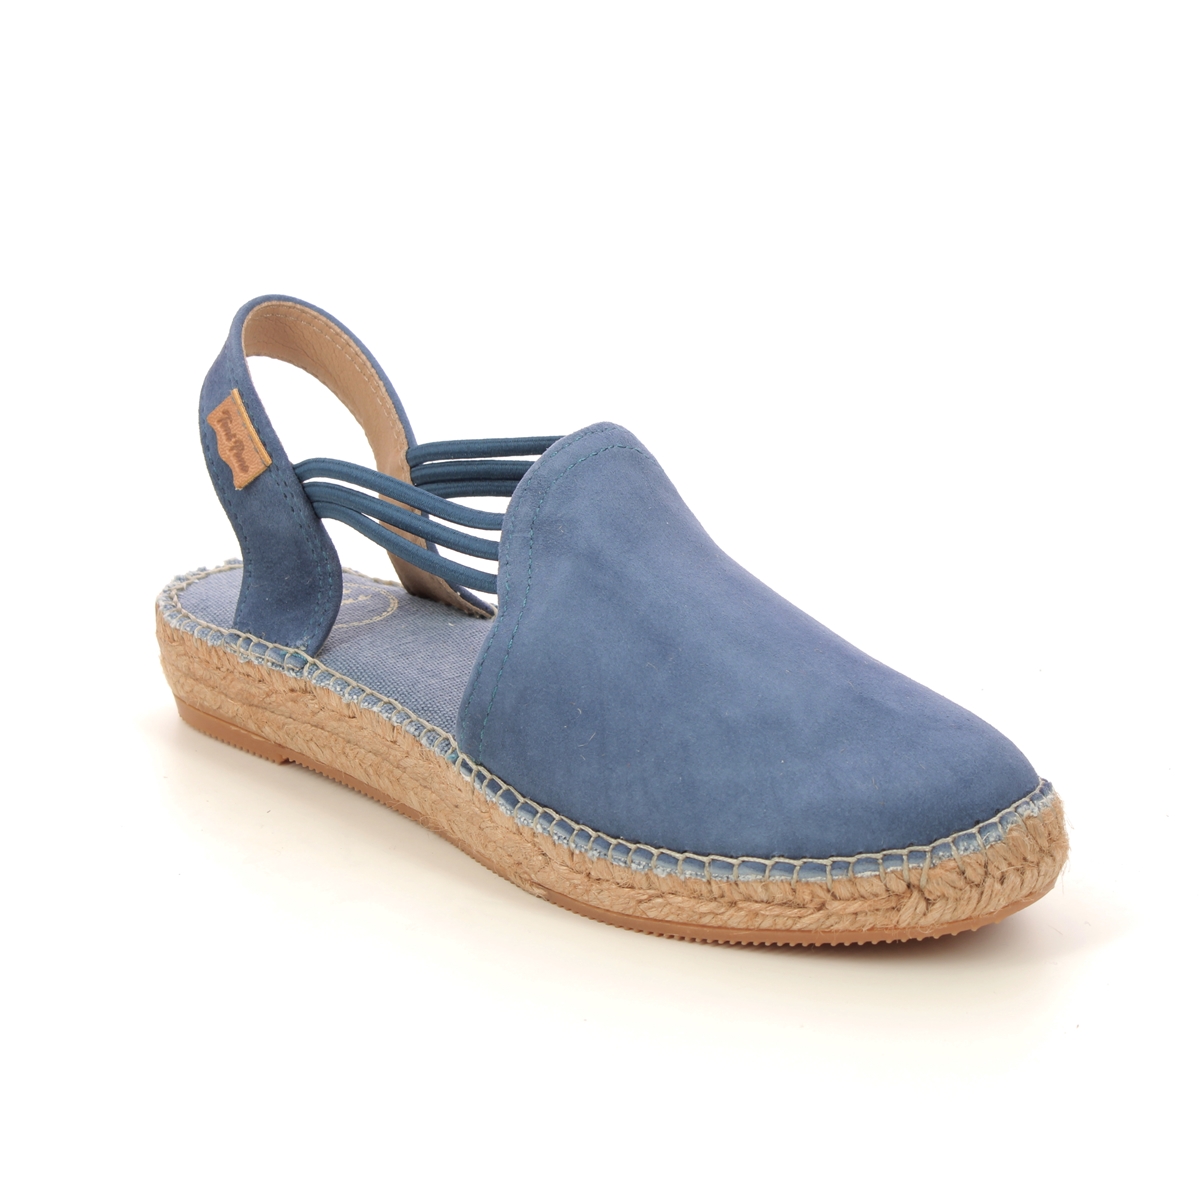 Toni Pons Nuria Denim Suede Womens Espadrilles 0110-73 in a Plain Leather in Size 40